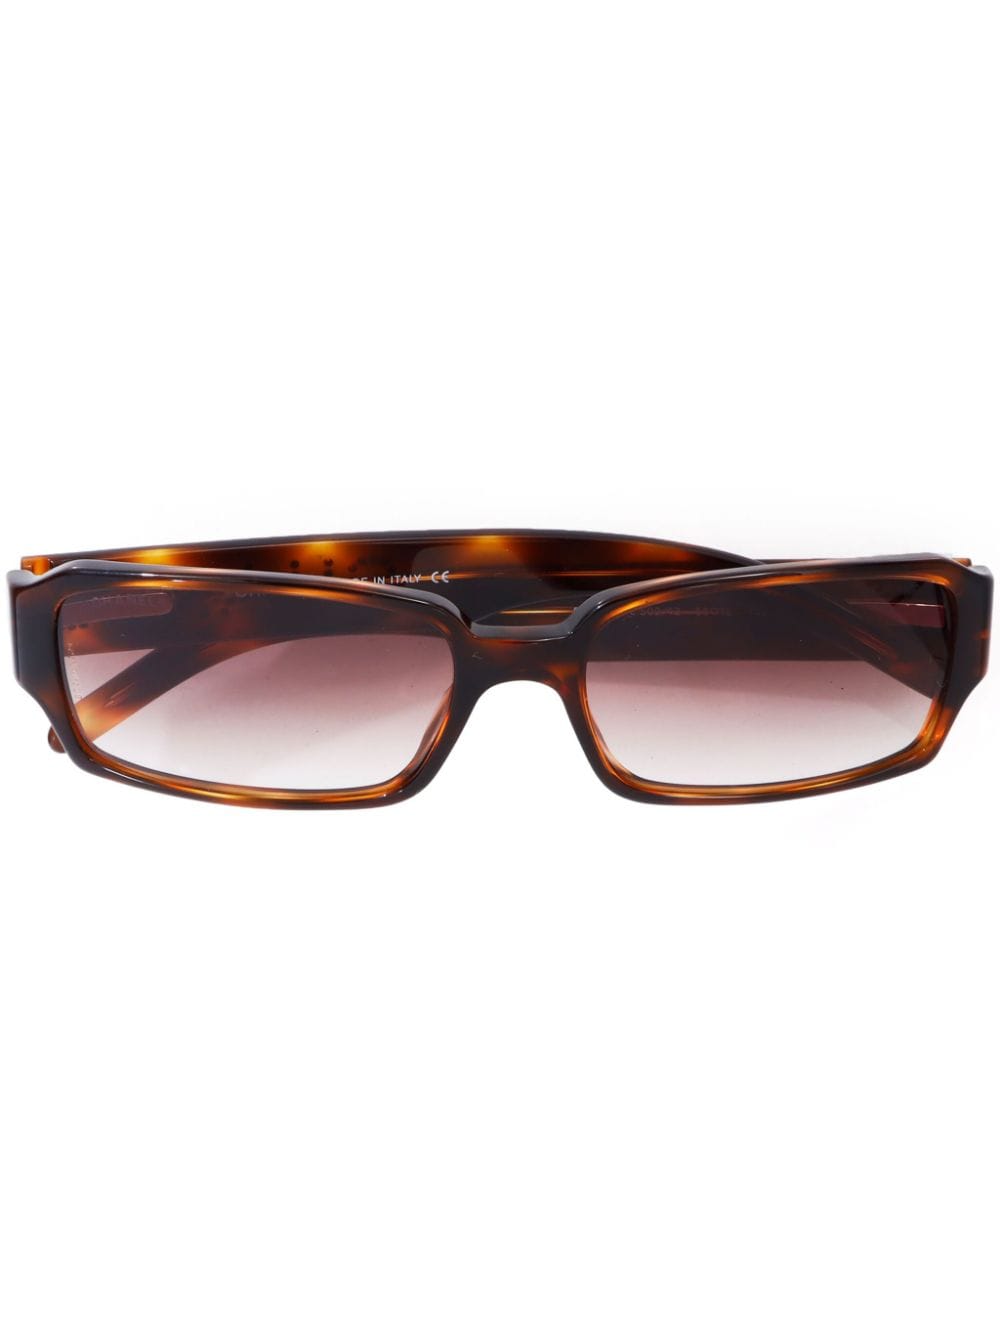 CHANEL Pre-Owned 2000s tortoiseshell rectangle-frames sunglasses - Brown von CHANEL Pre-Owned